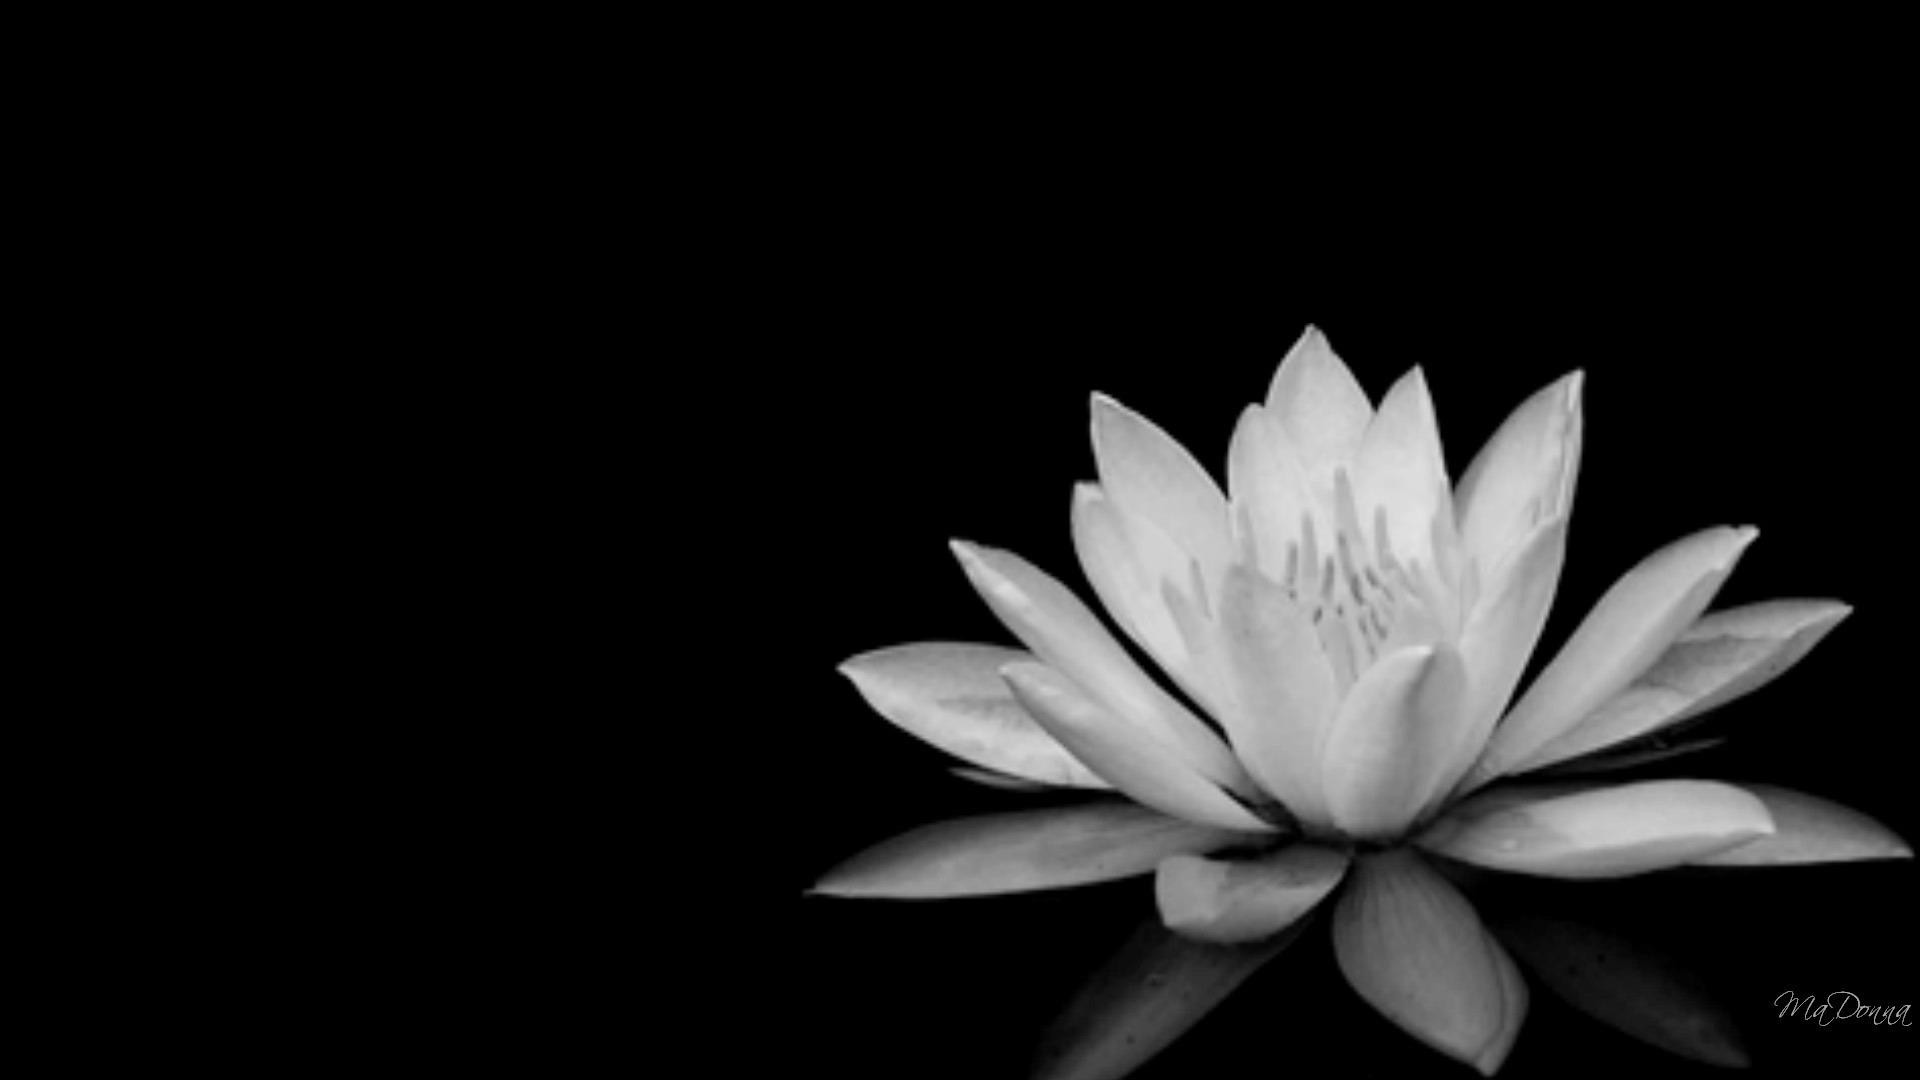 Flower in black and white image